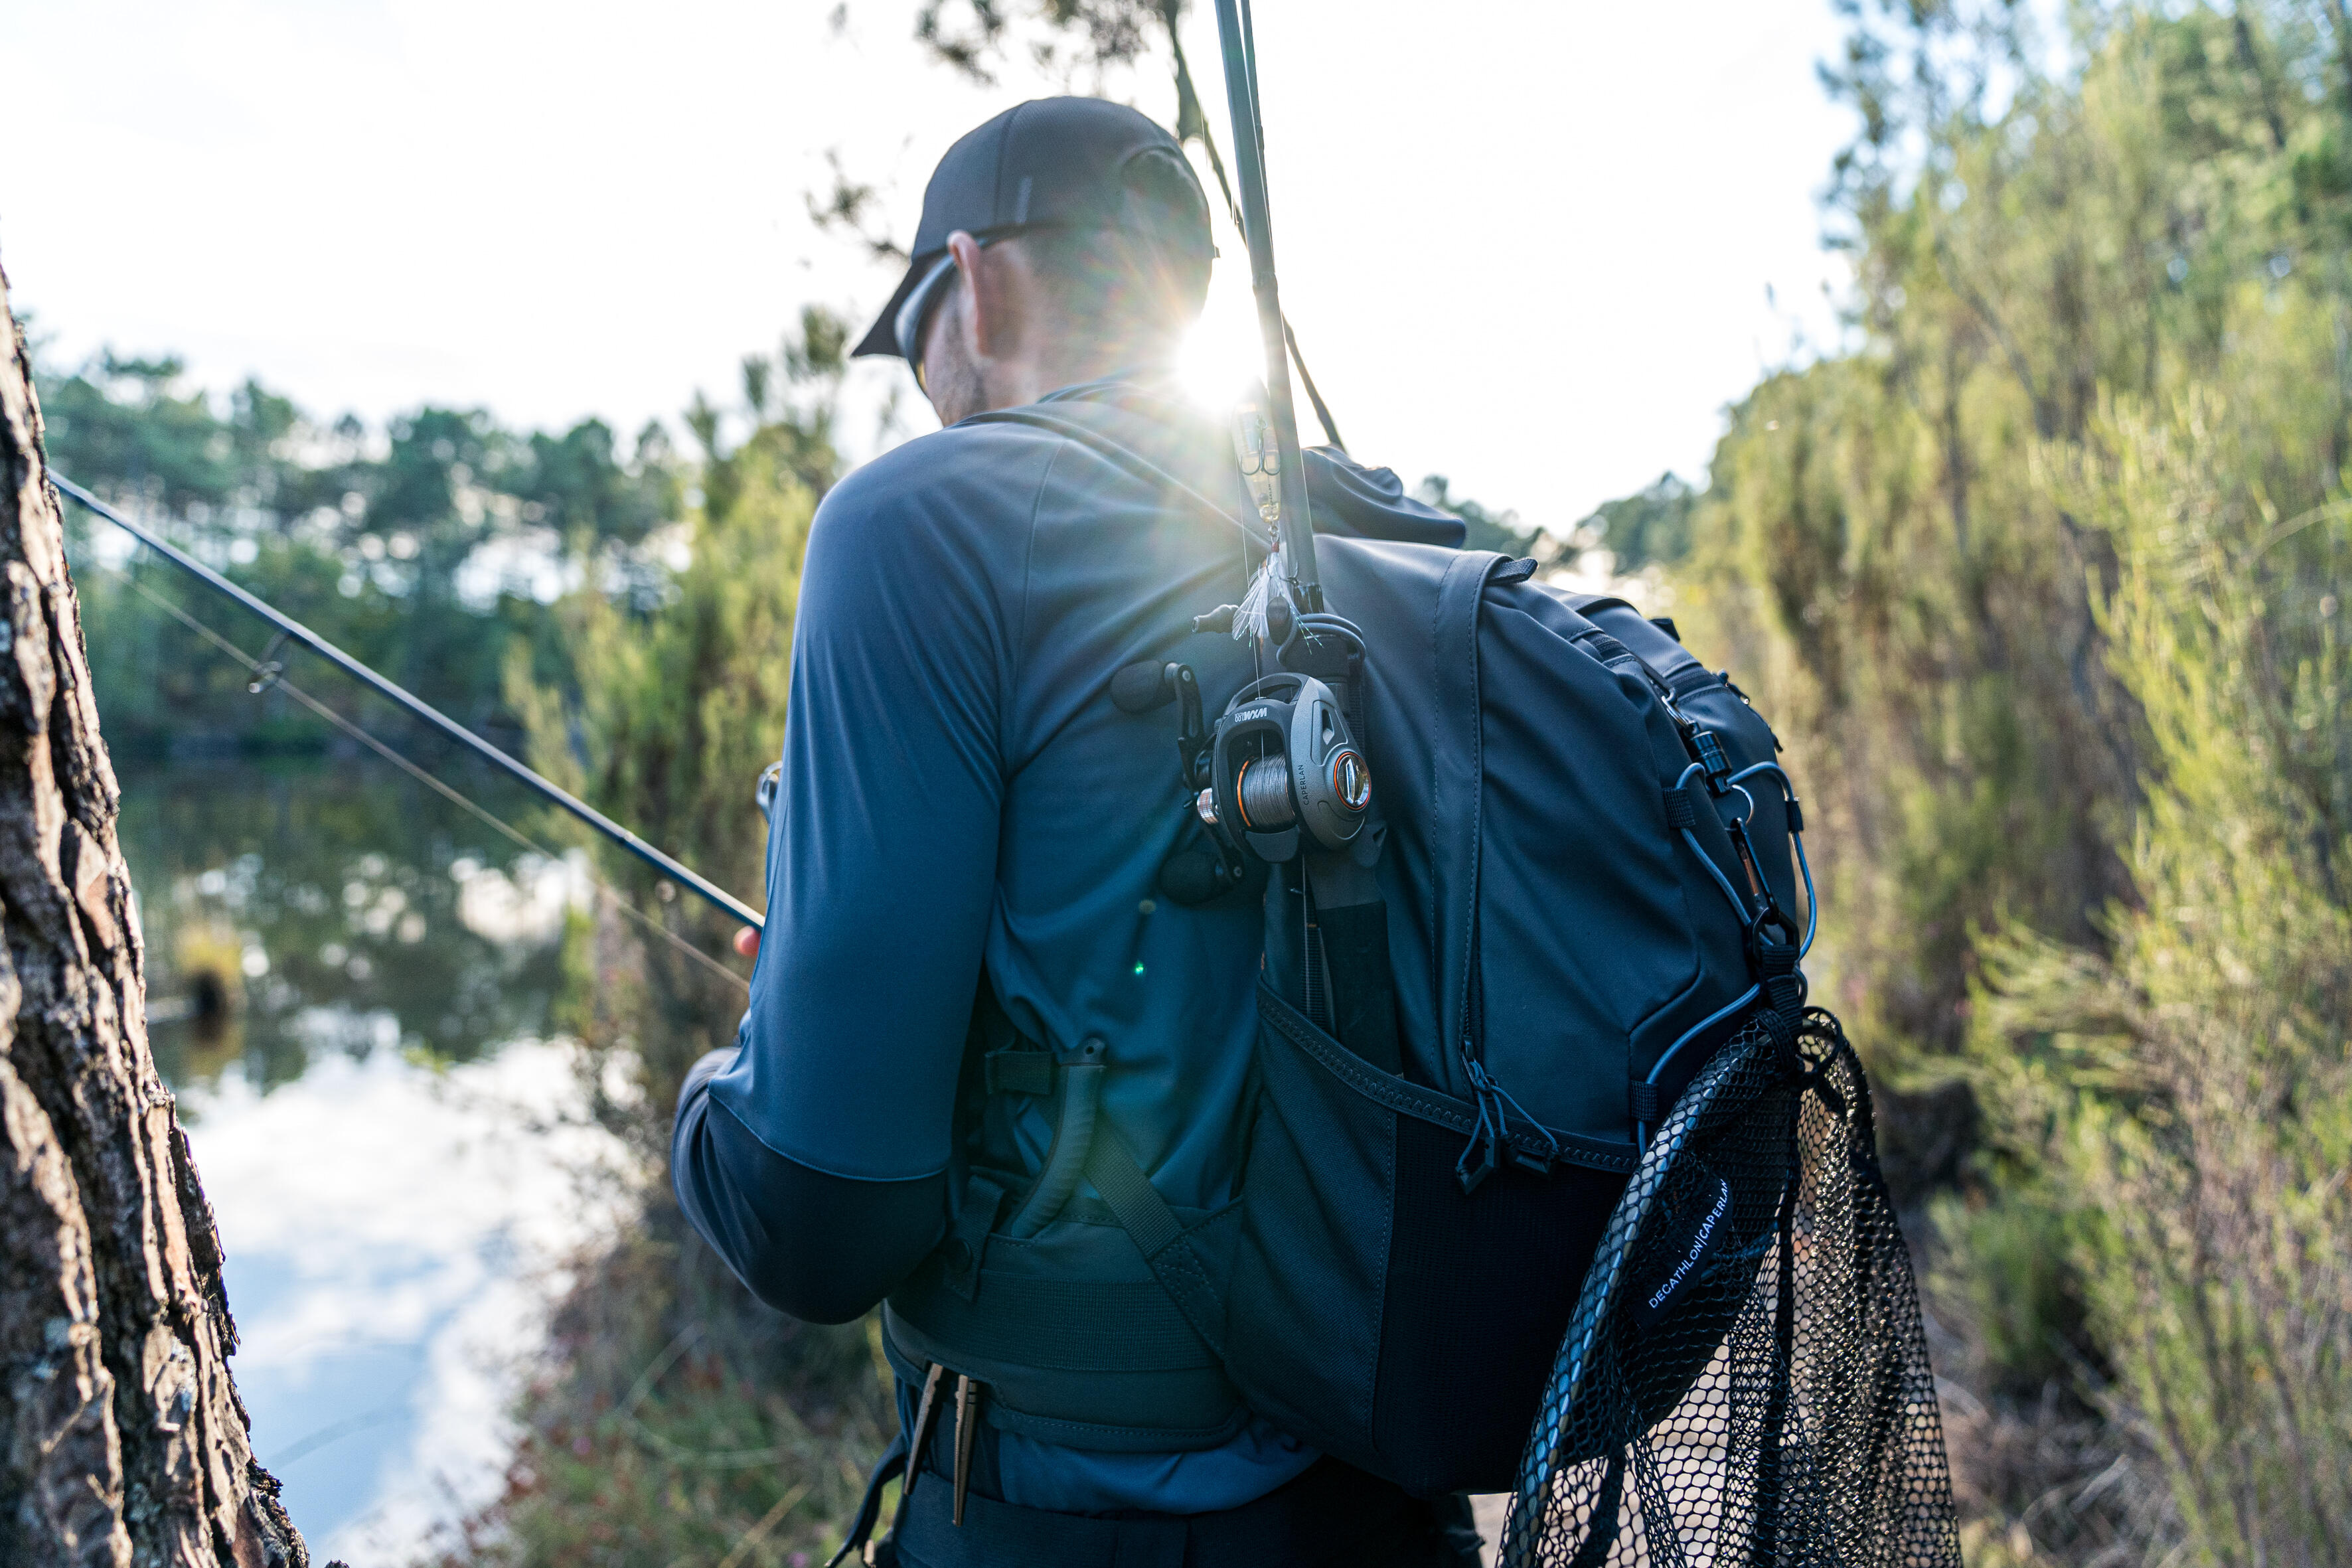 BKCNTRY wateproof fishing backpacks are available now - DRYFT™ Fishing  Waders